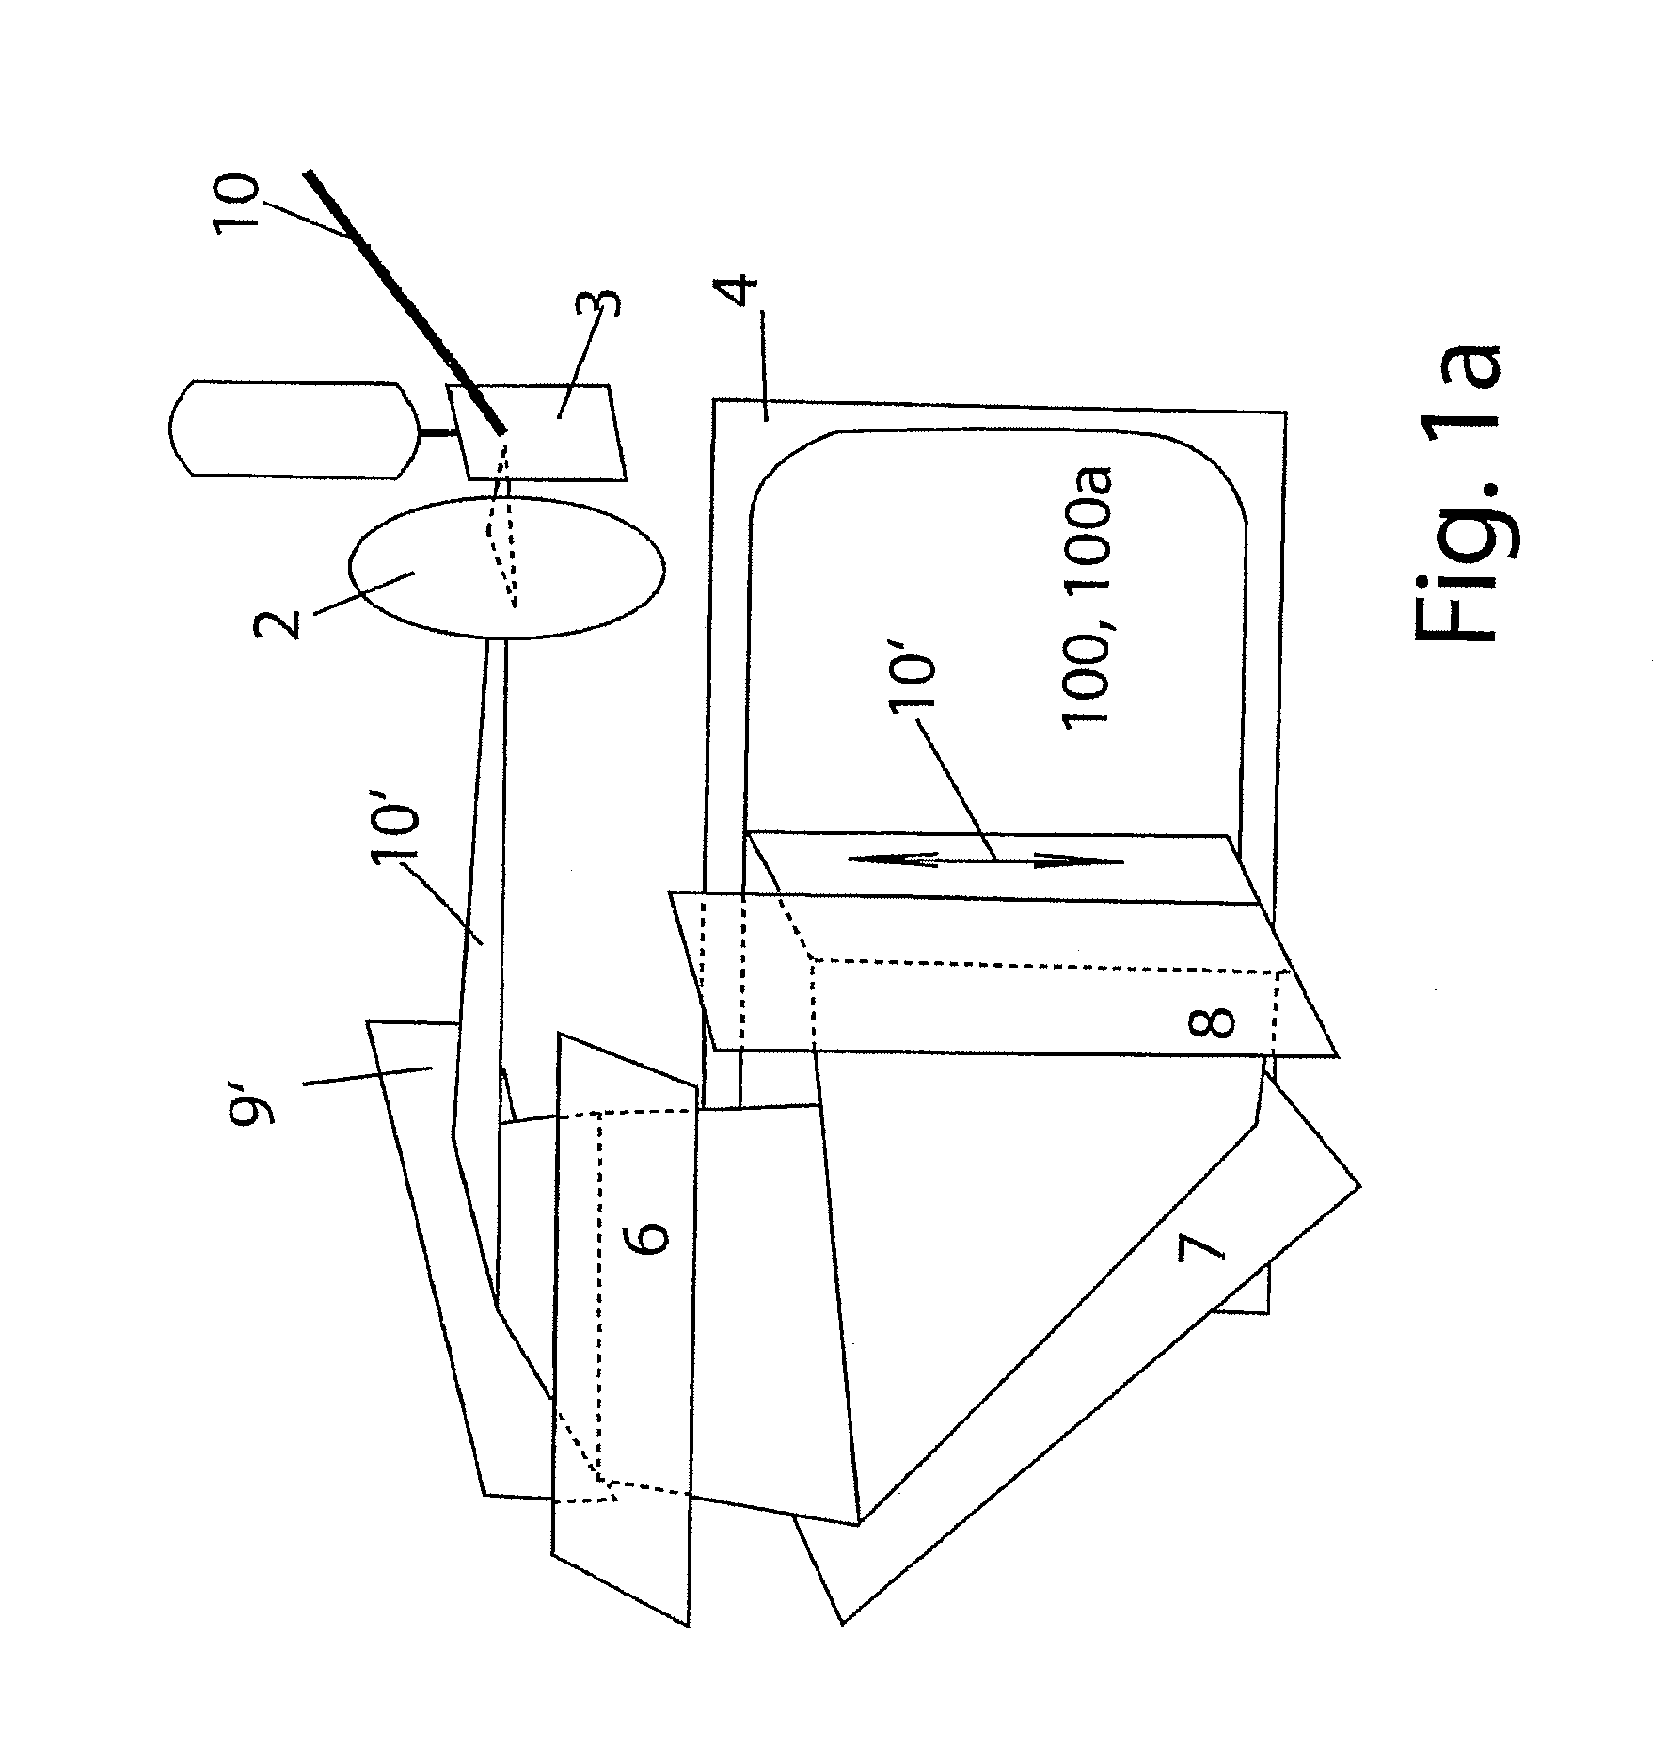 Method and Device for Laser Inscribing